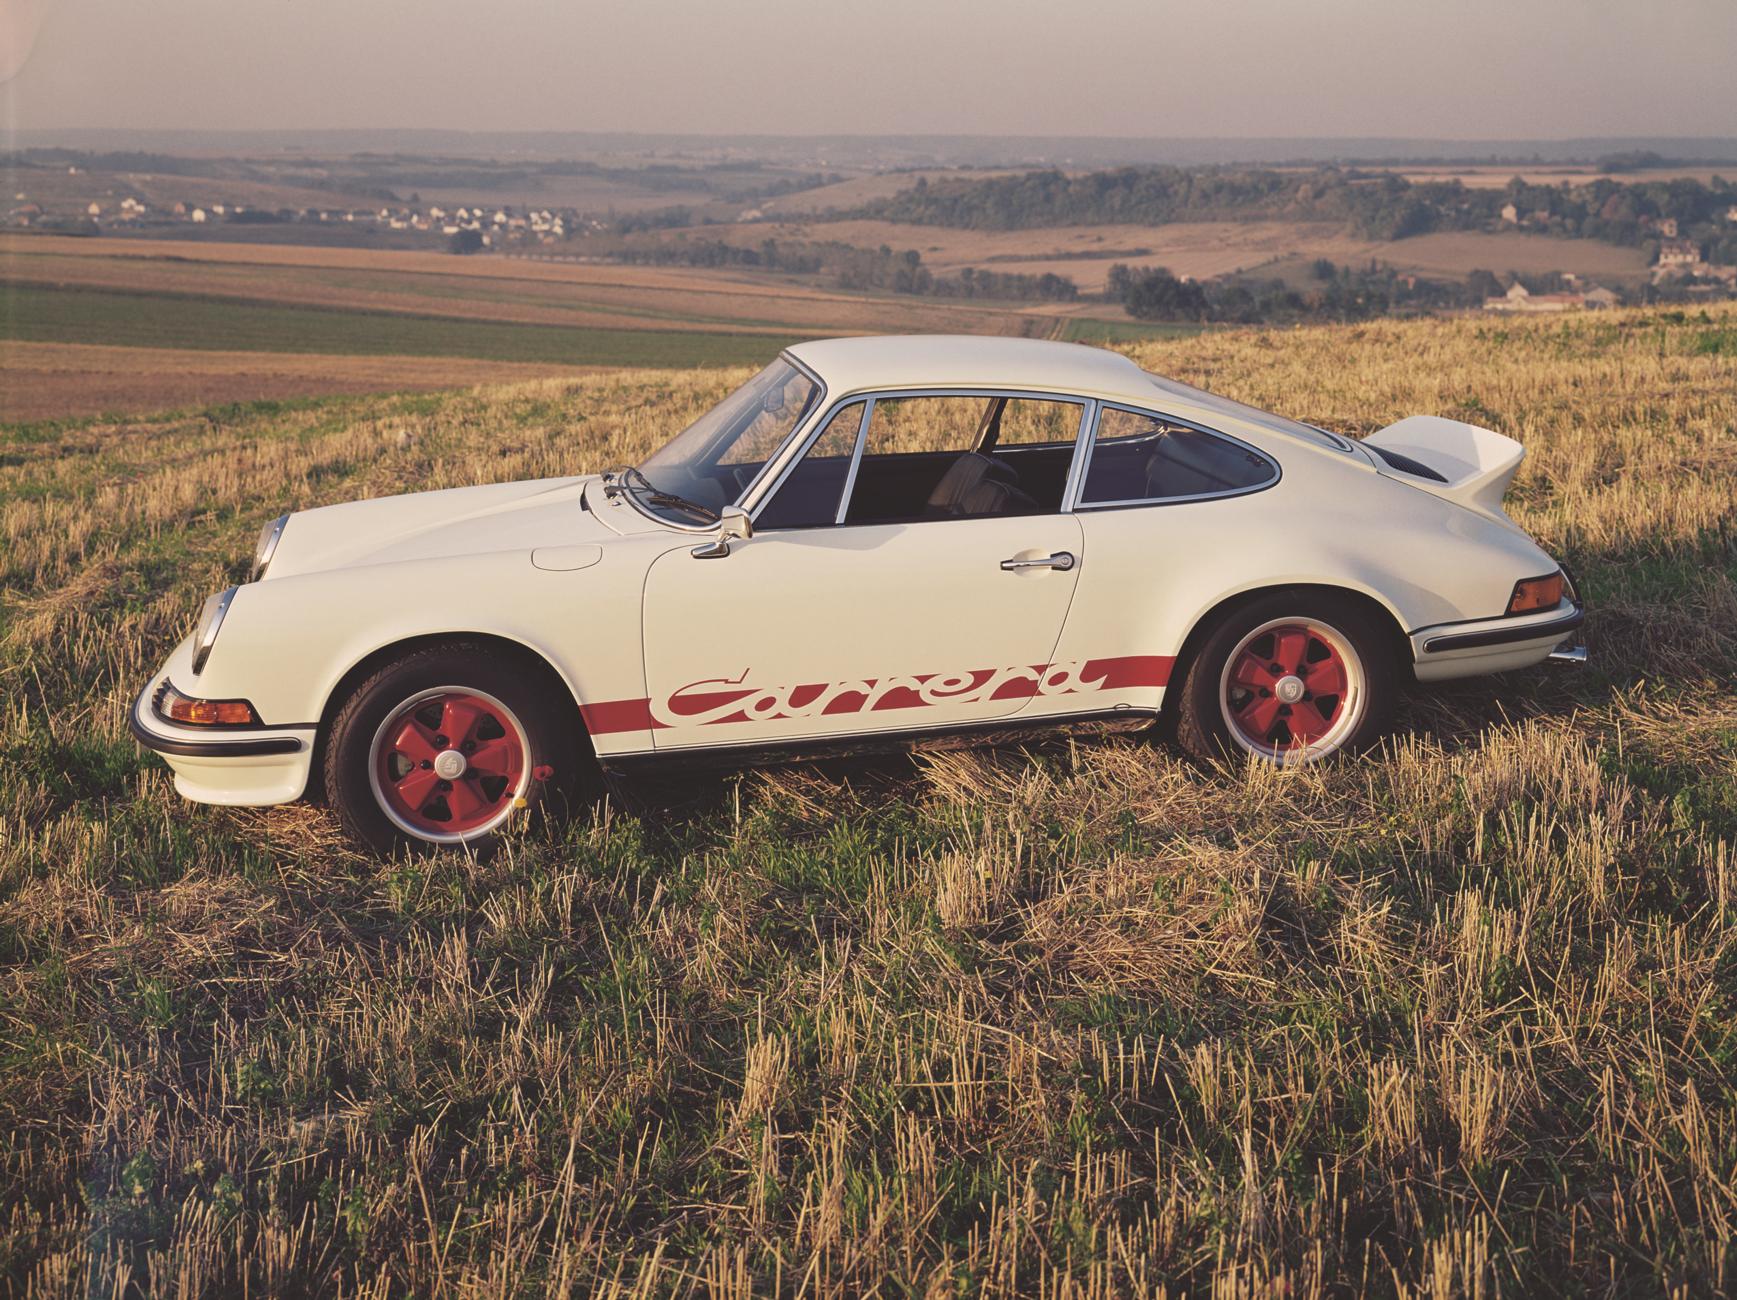 Porsche Club of America - 10 Reasons Why We Love the 911 Carrera RS | PCA Tech Tips